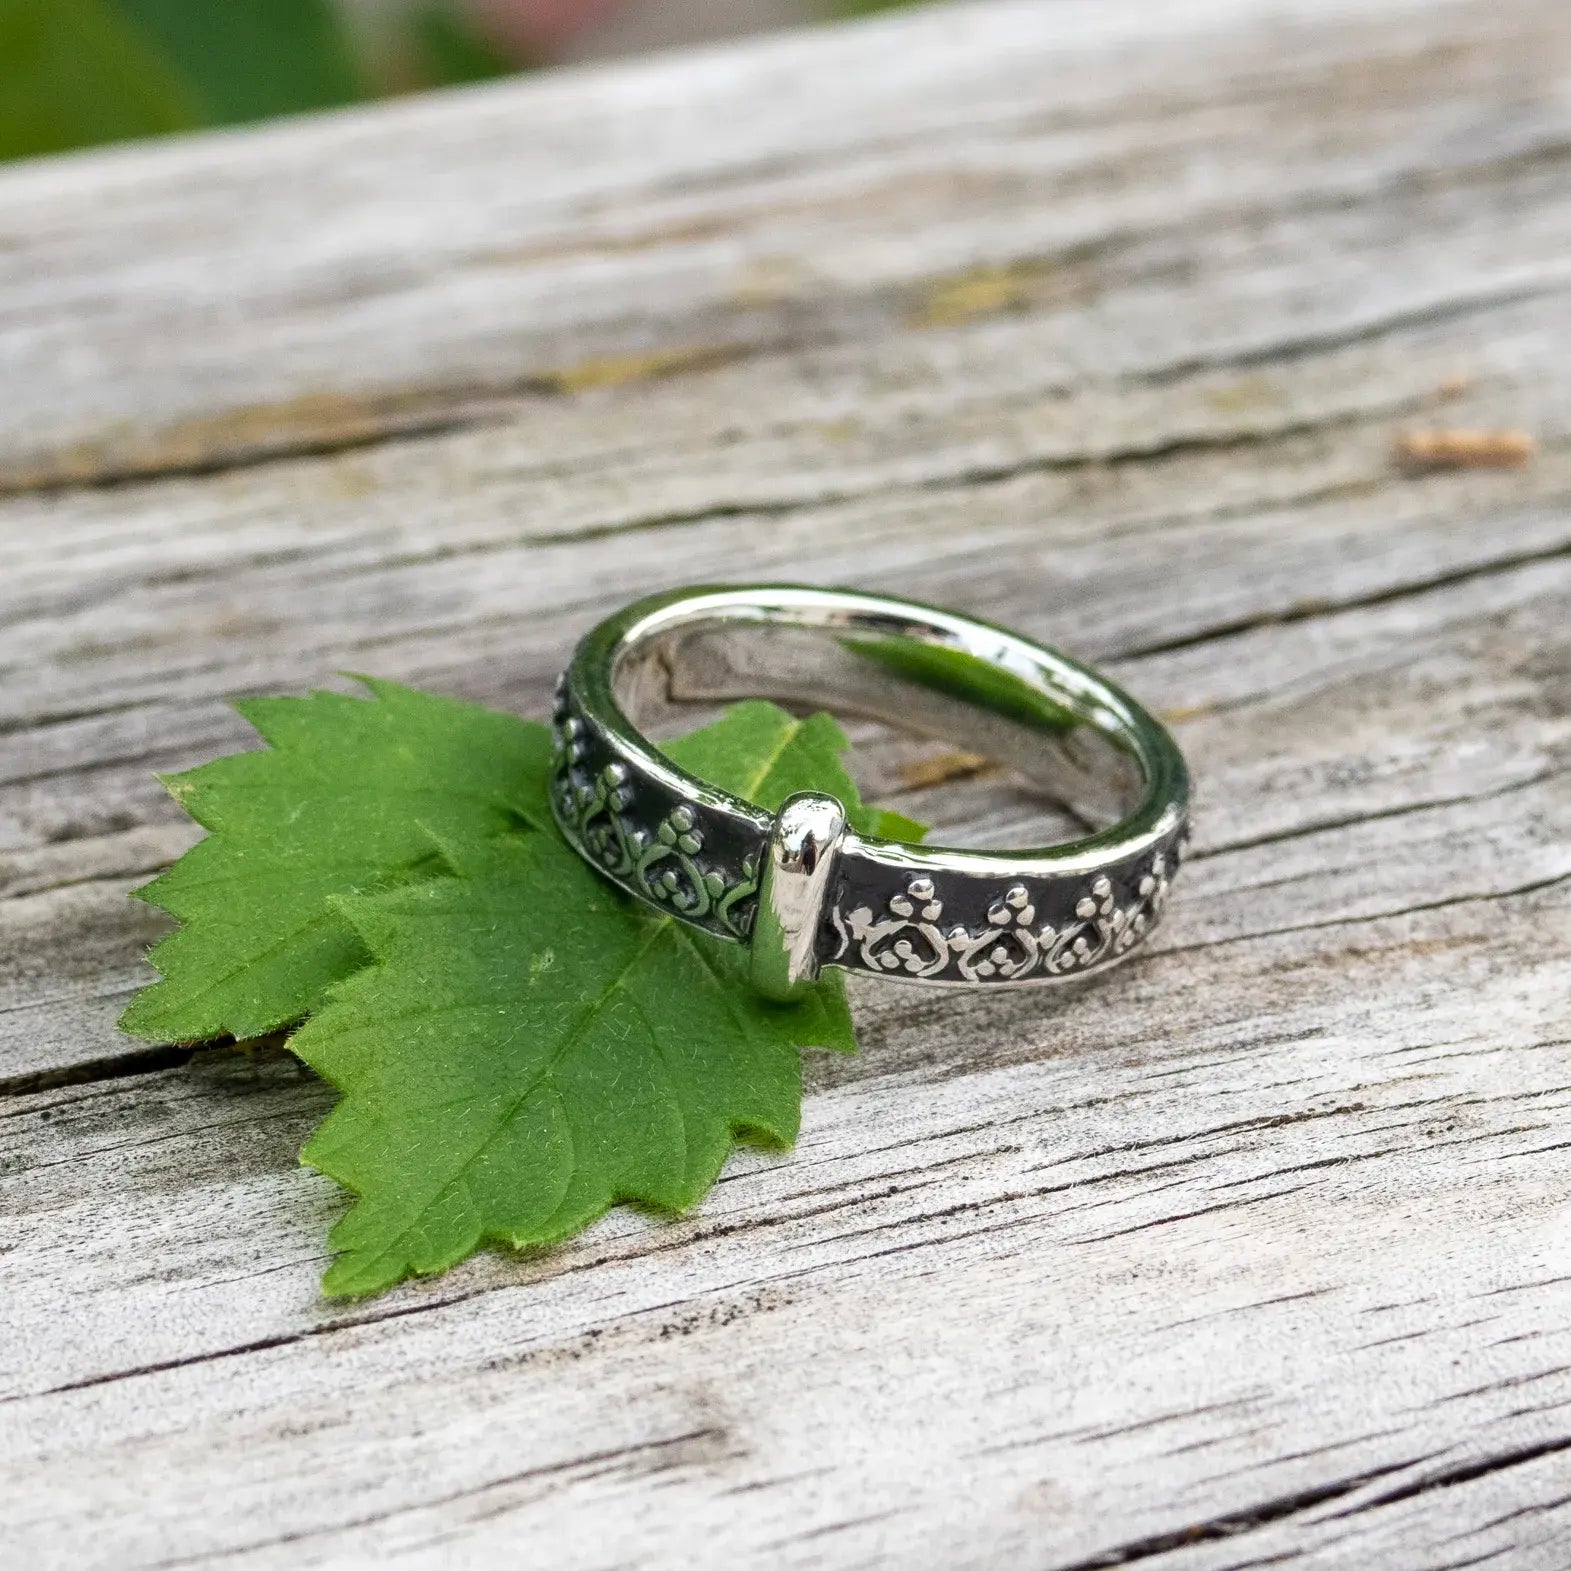 Outlander inspired ring with crown/queen styling. Made from sterling silver